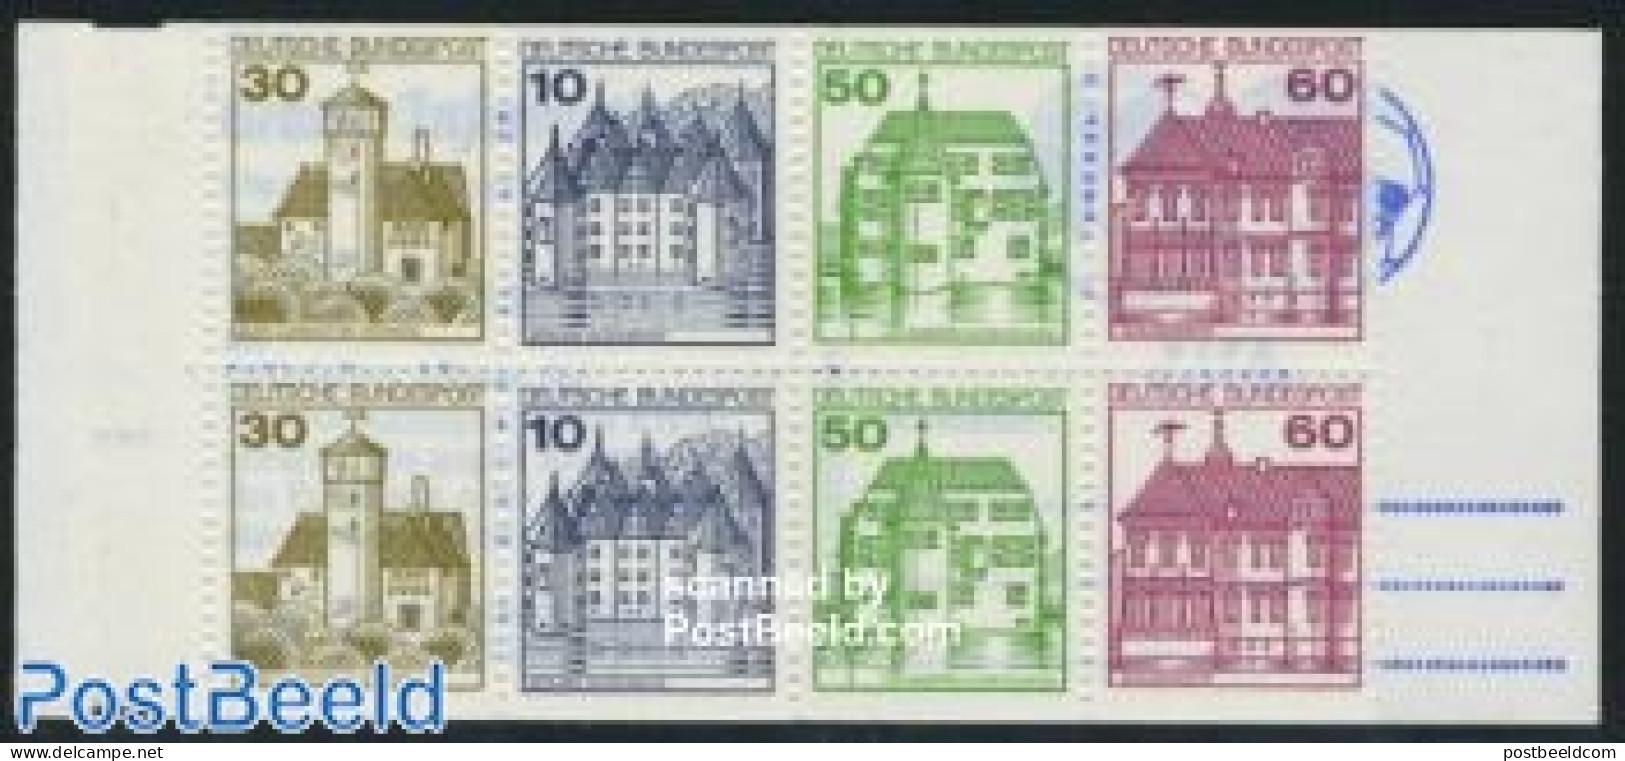 Germany, Federal Republic 1980 Castles Booklet (Sieger/FIFA), Mint NH, Stamp Booklets - Art - Castles & Fortifications - Neufs